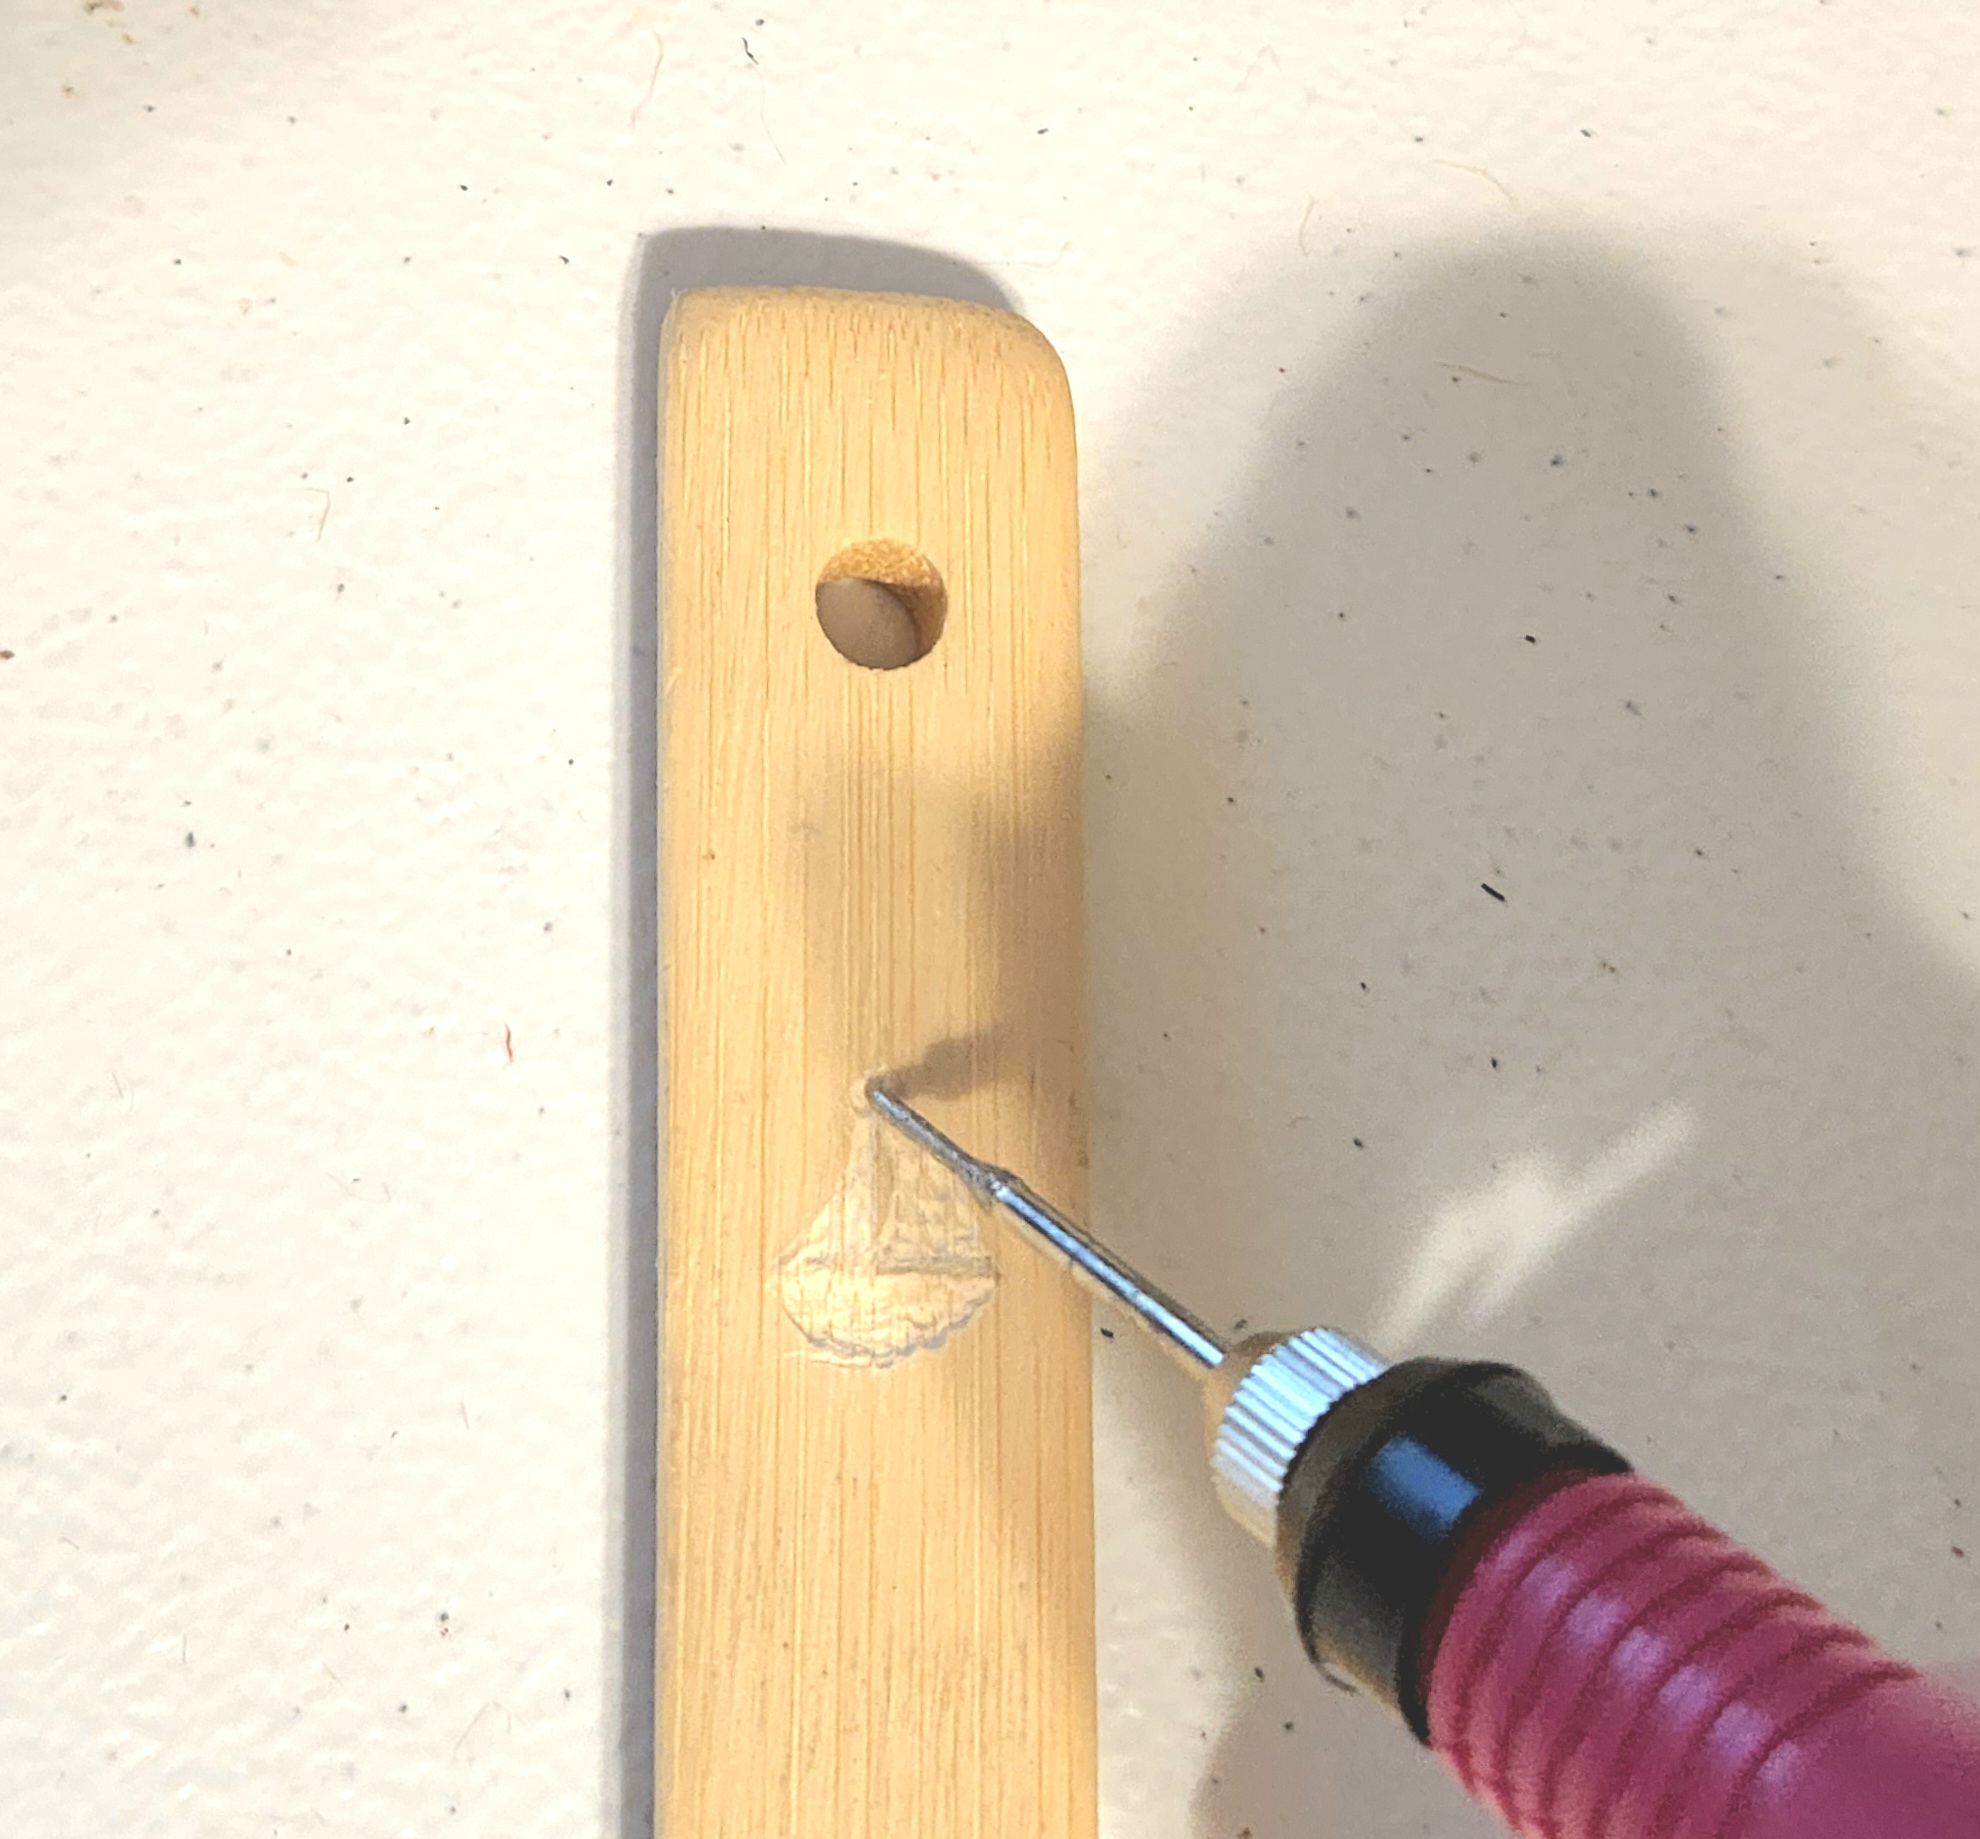 Going over a sailboat design with an etcher on a wood spoon.